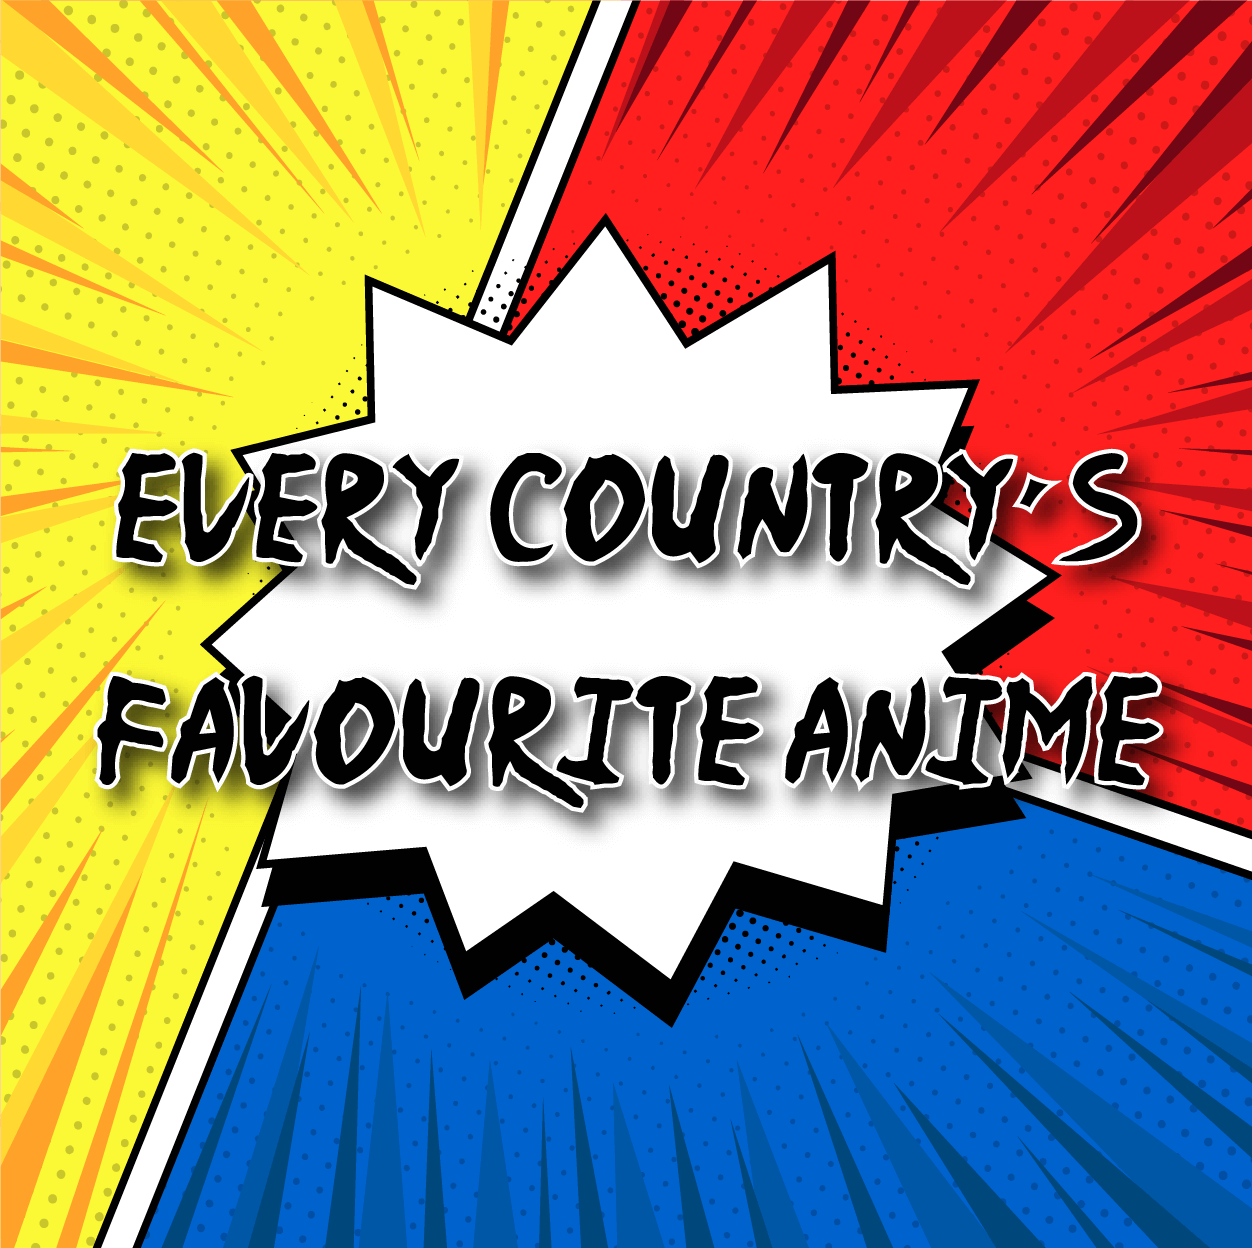 Every country's favourite anime